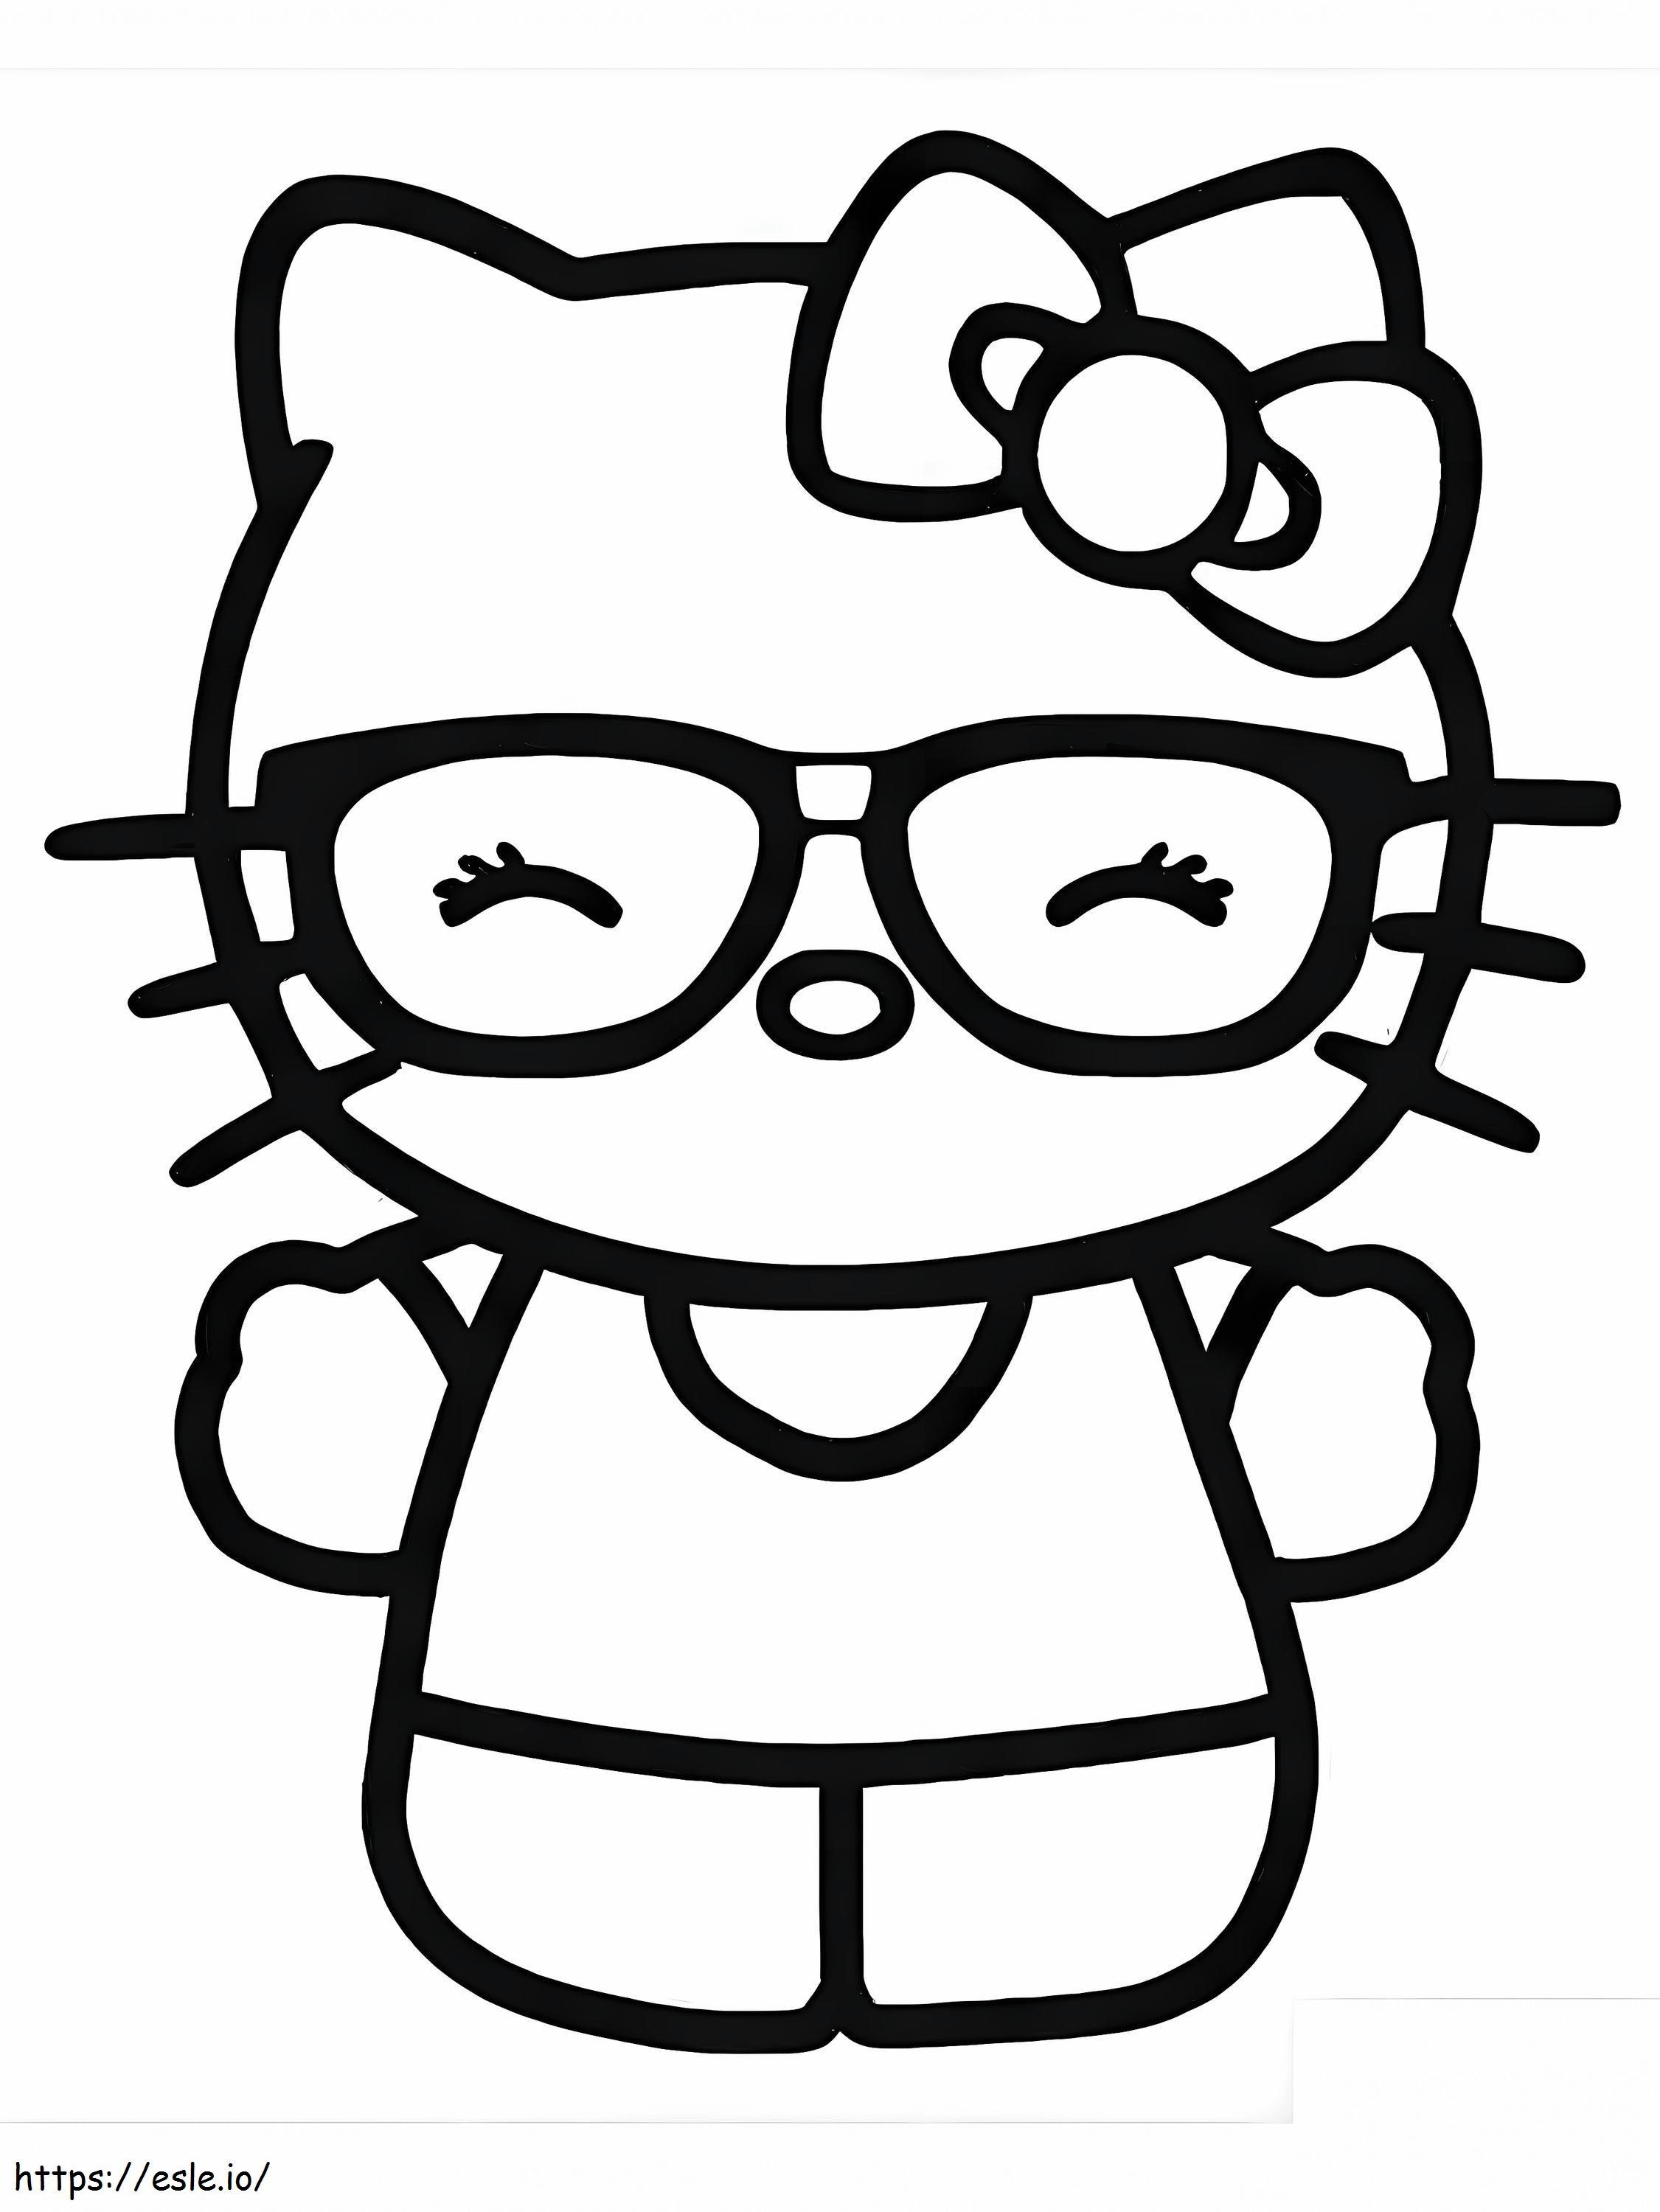 Coloriage Coloriages Kitty Bonjour Hello Kitty Bonjour Kitty à imprimer dessin